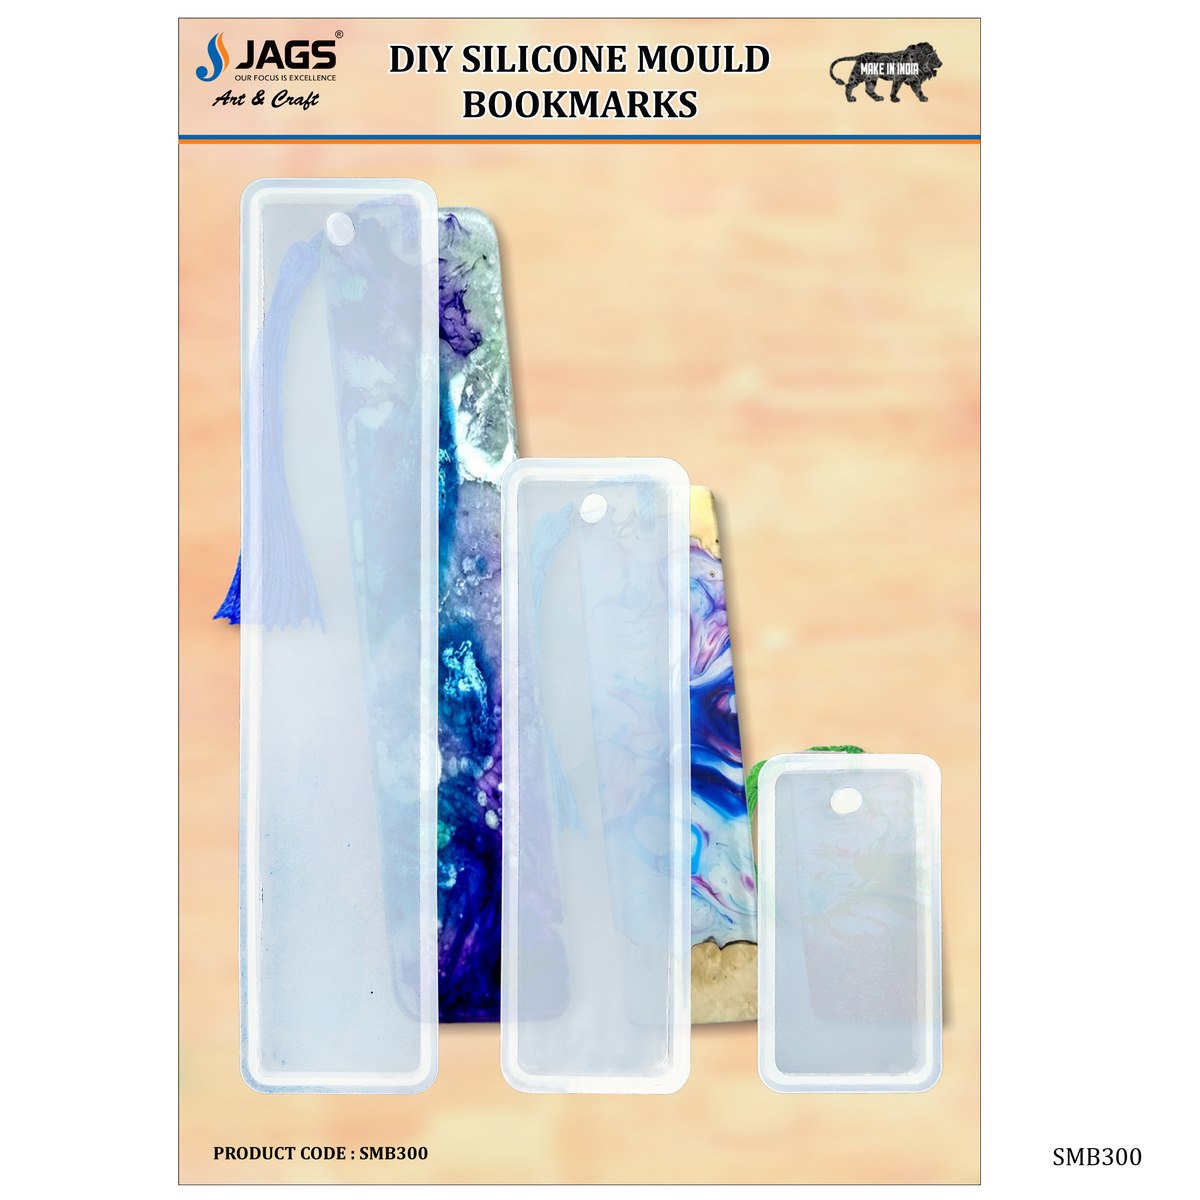 jags-mumbai Mould Silicone mould bookmarks 2 4 6 inch 3Pc Set